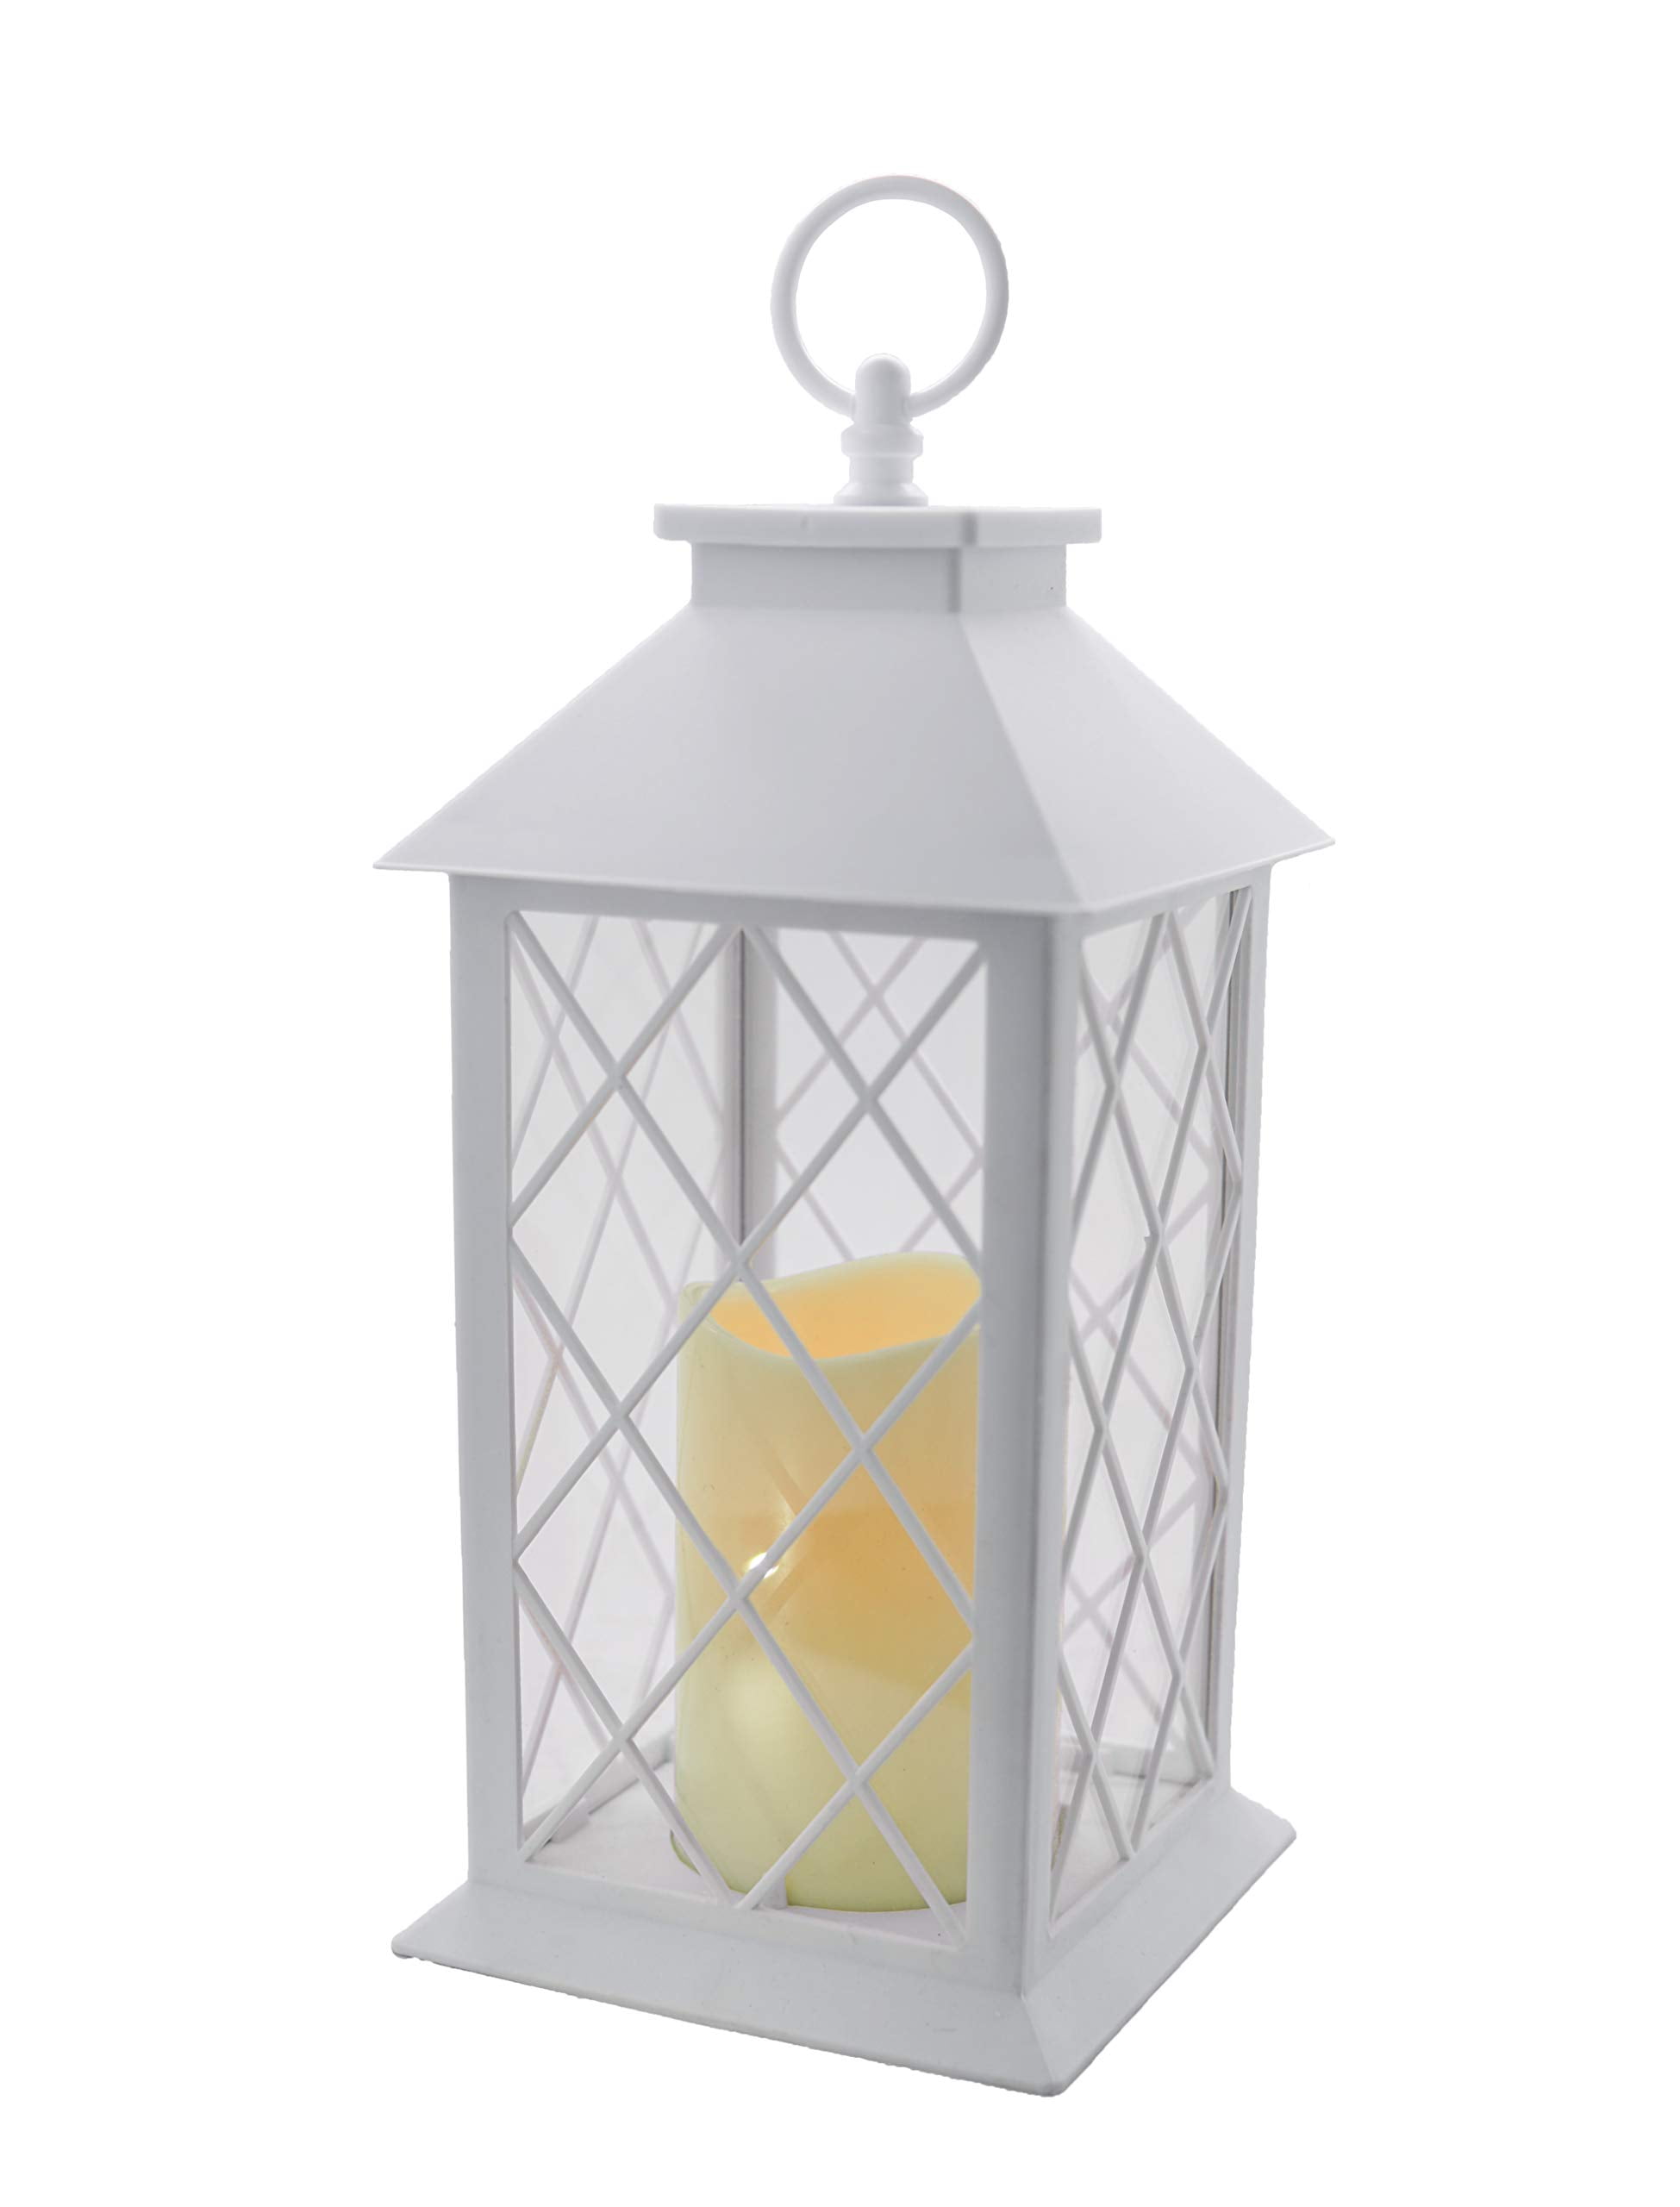 Prescott Large Indoor Outdoor Lantern with Flameless LED Candles